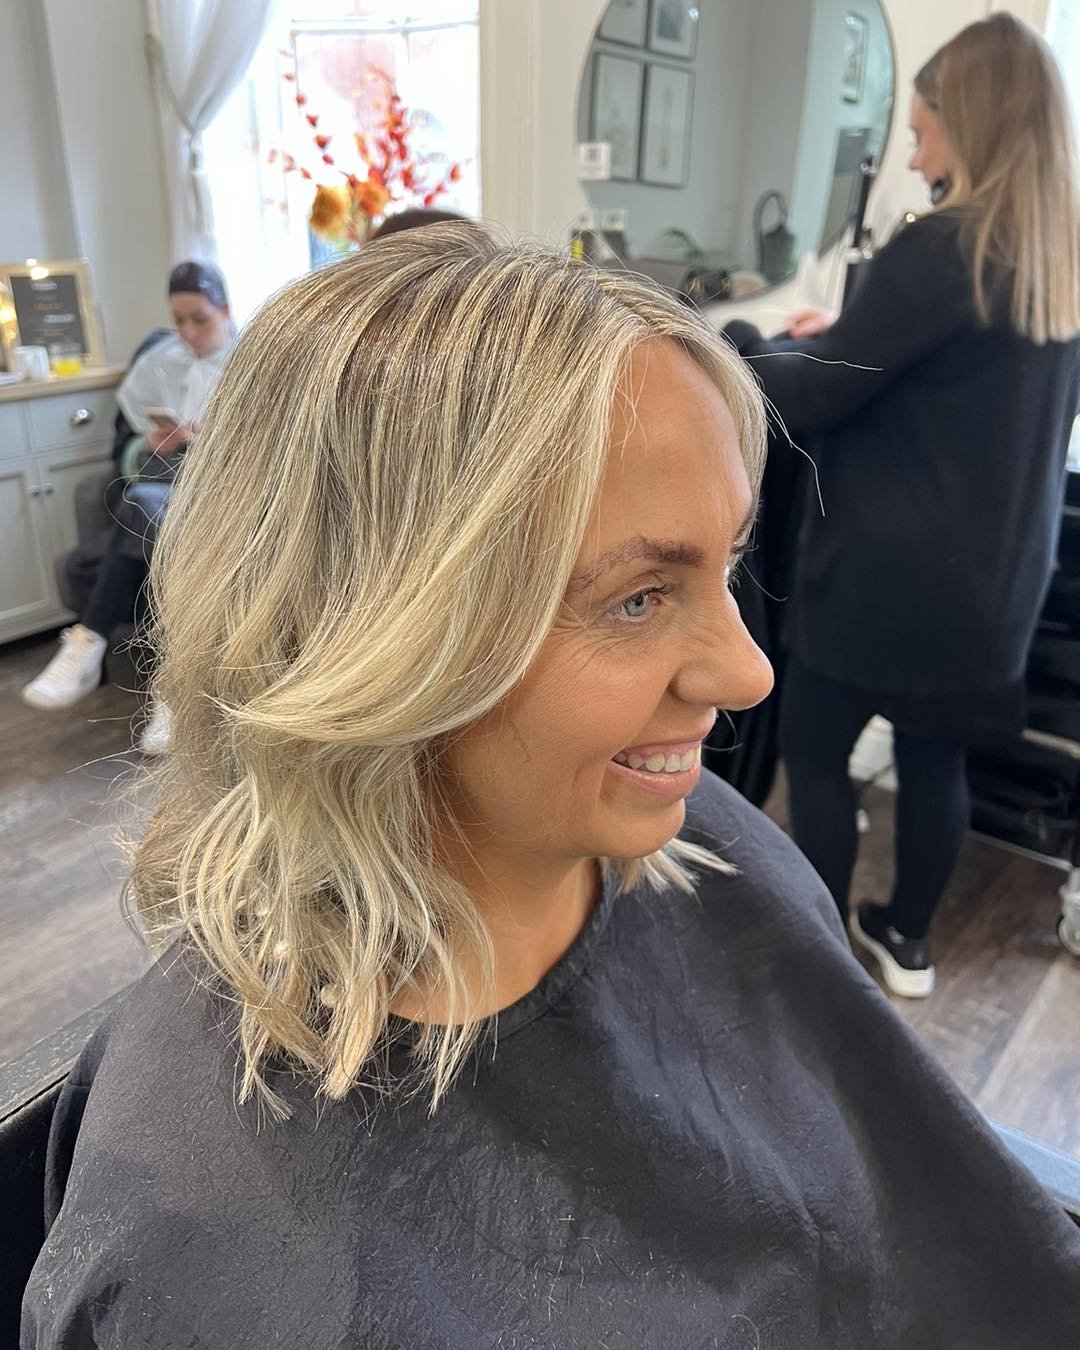 🌟 Expertly Crafted Baby Lights for a Creamy Blonde 🌟

To achieve this stunning creamy bright blonde, Tom meticulously placed numerous fine baby light foils throughout the client's hair. These delicate highlights add dimension and depth, creating a 